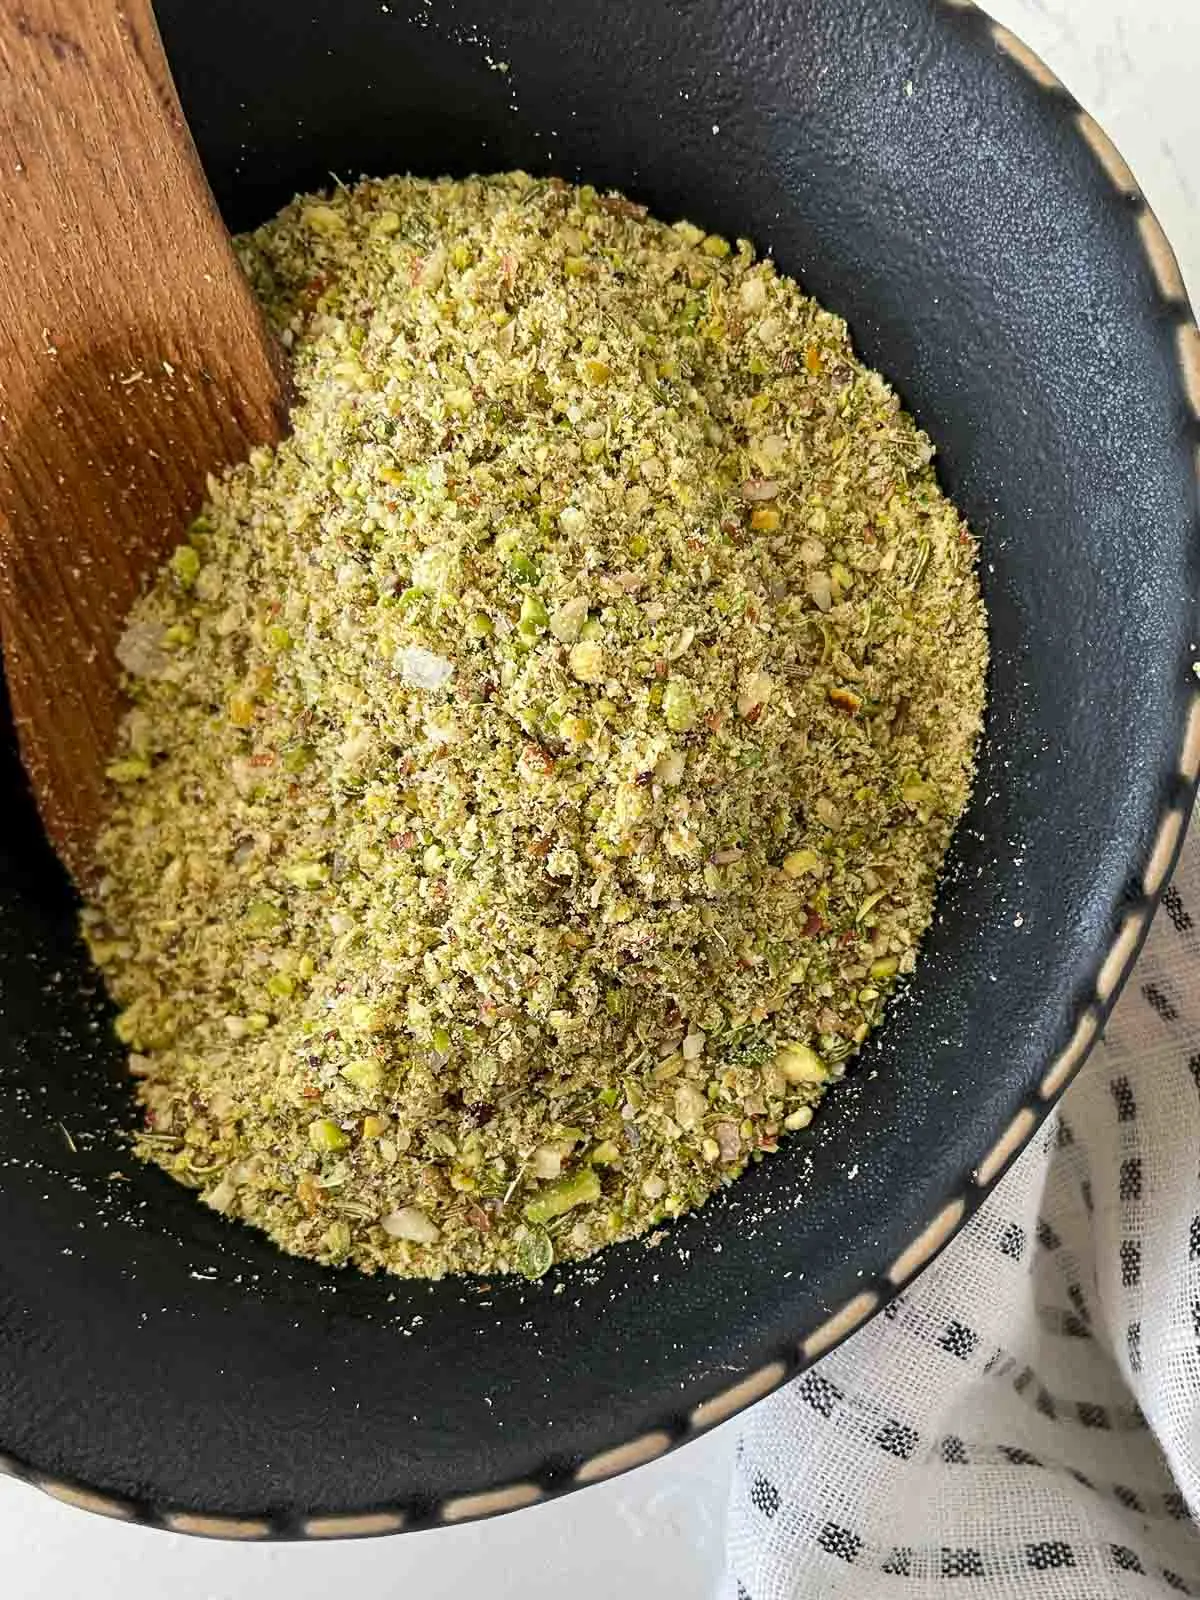 Homemade dukkah spice mix in a bowl